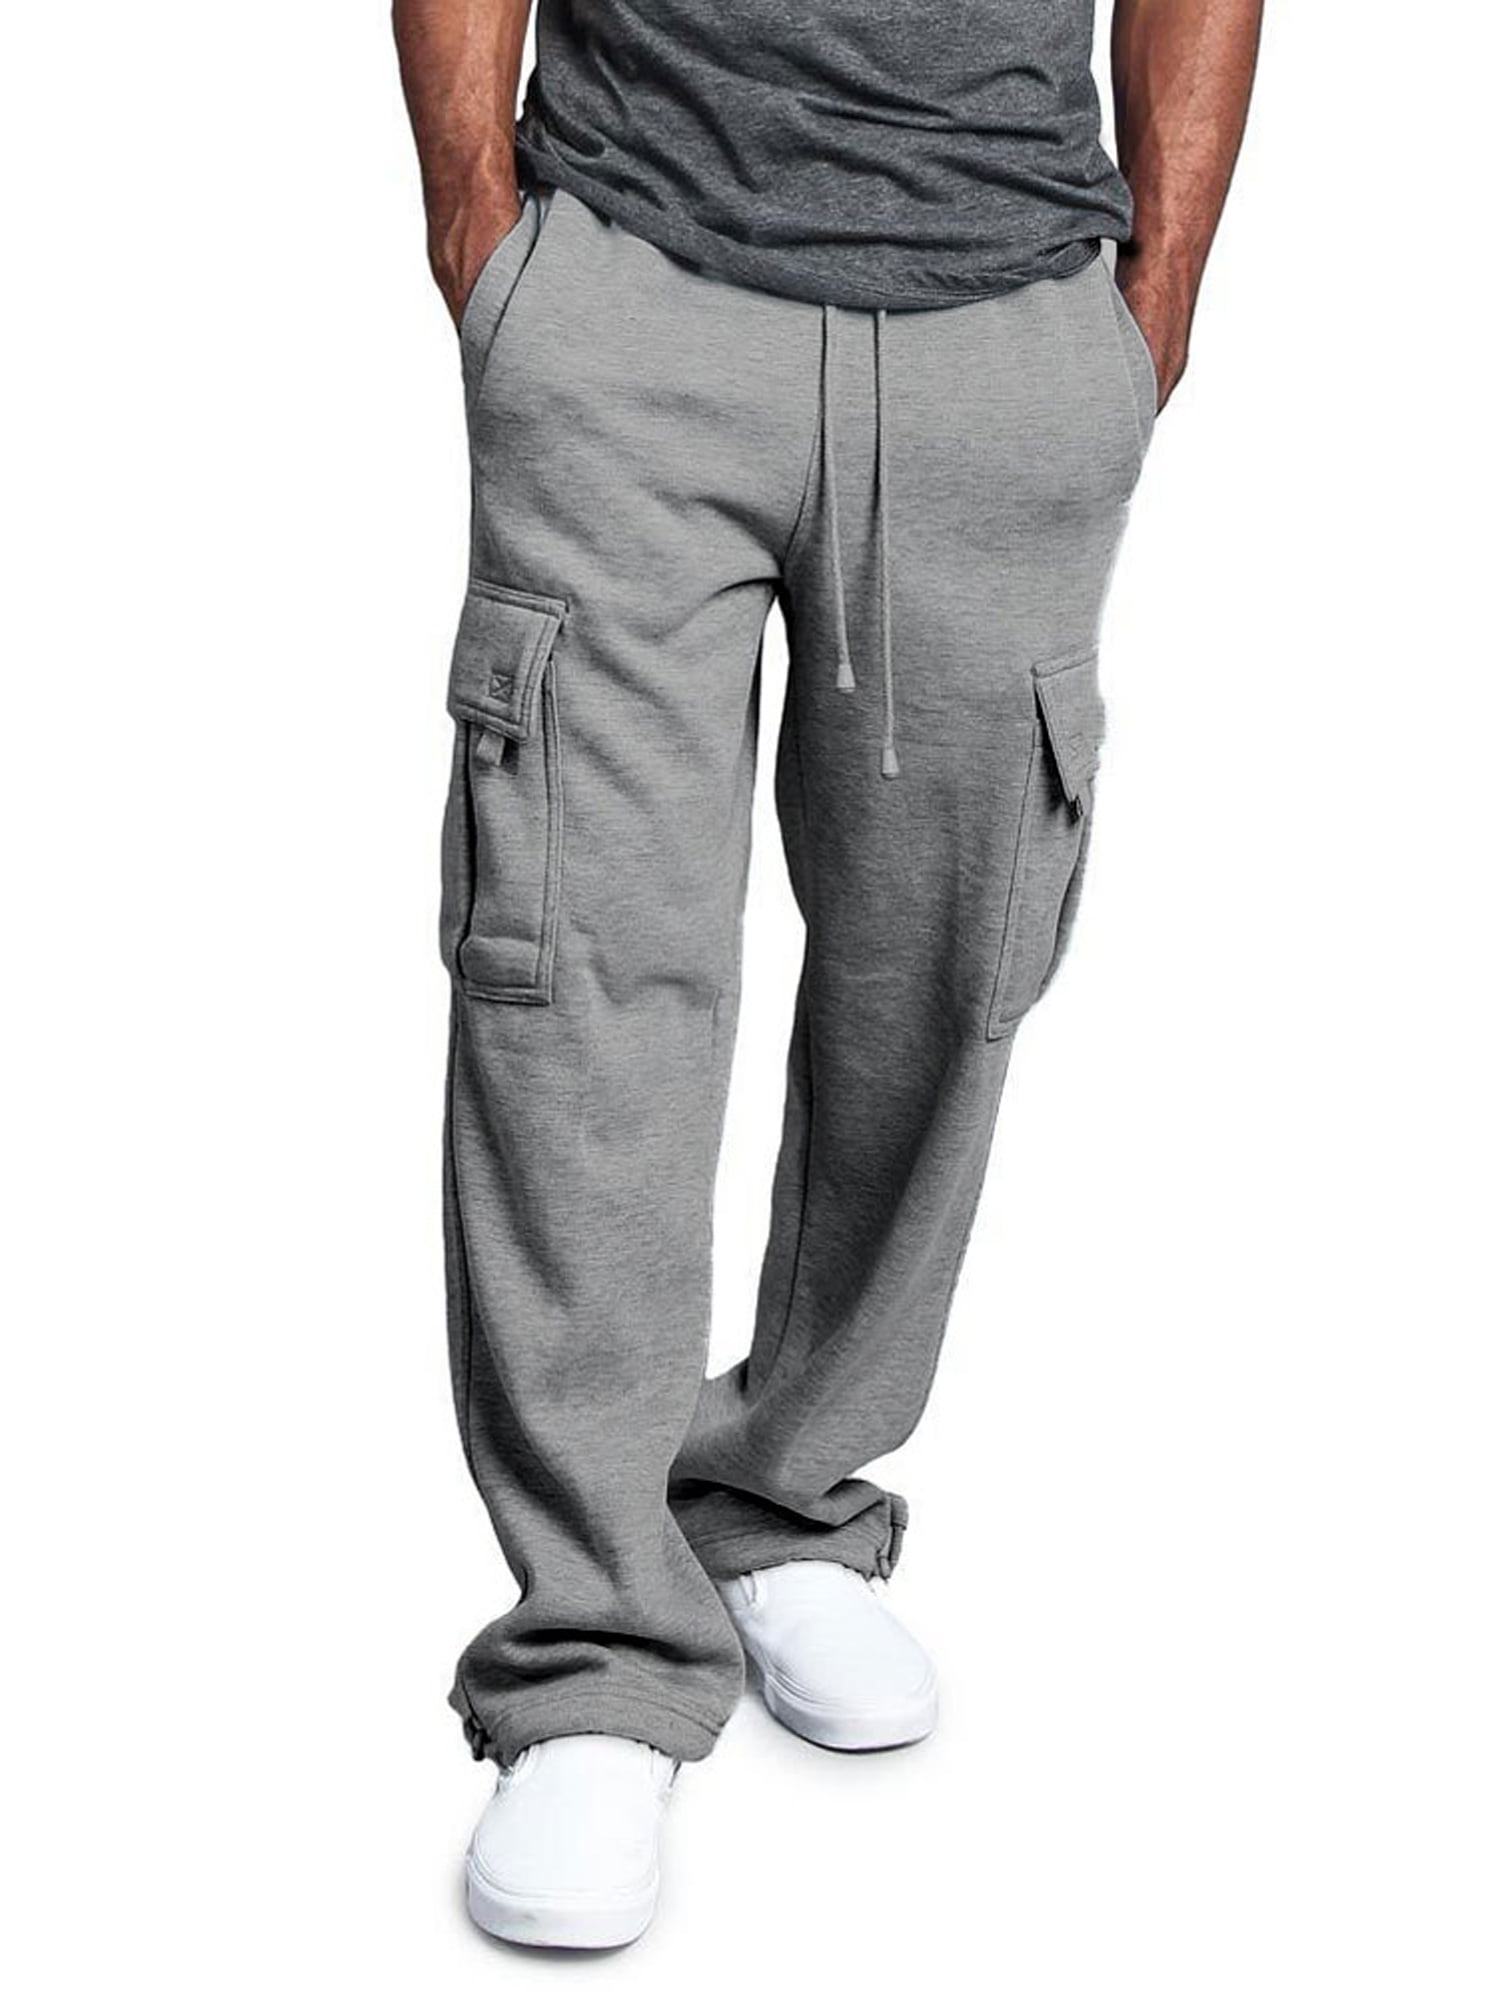 Agnes Urban Mens Cargo Sweatpants Open Bottom Straight Leg Casual Loose Fit Baggy Athletic Jogger Pants with Pockets